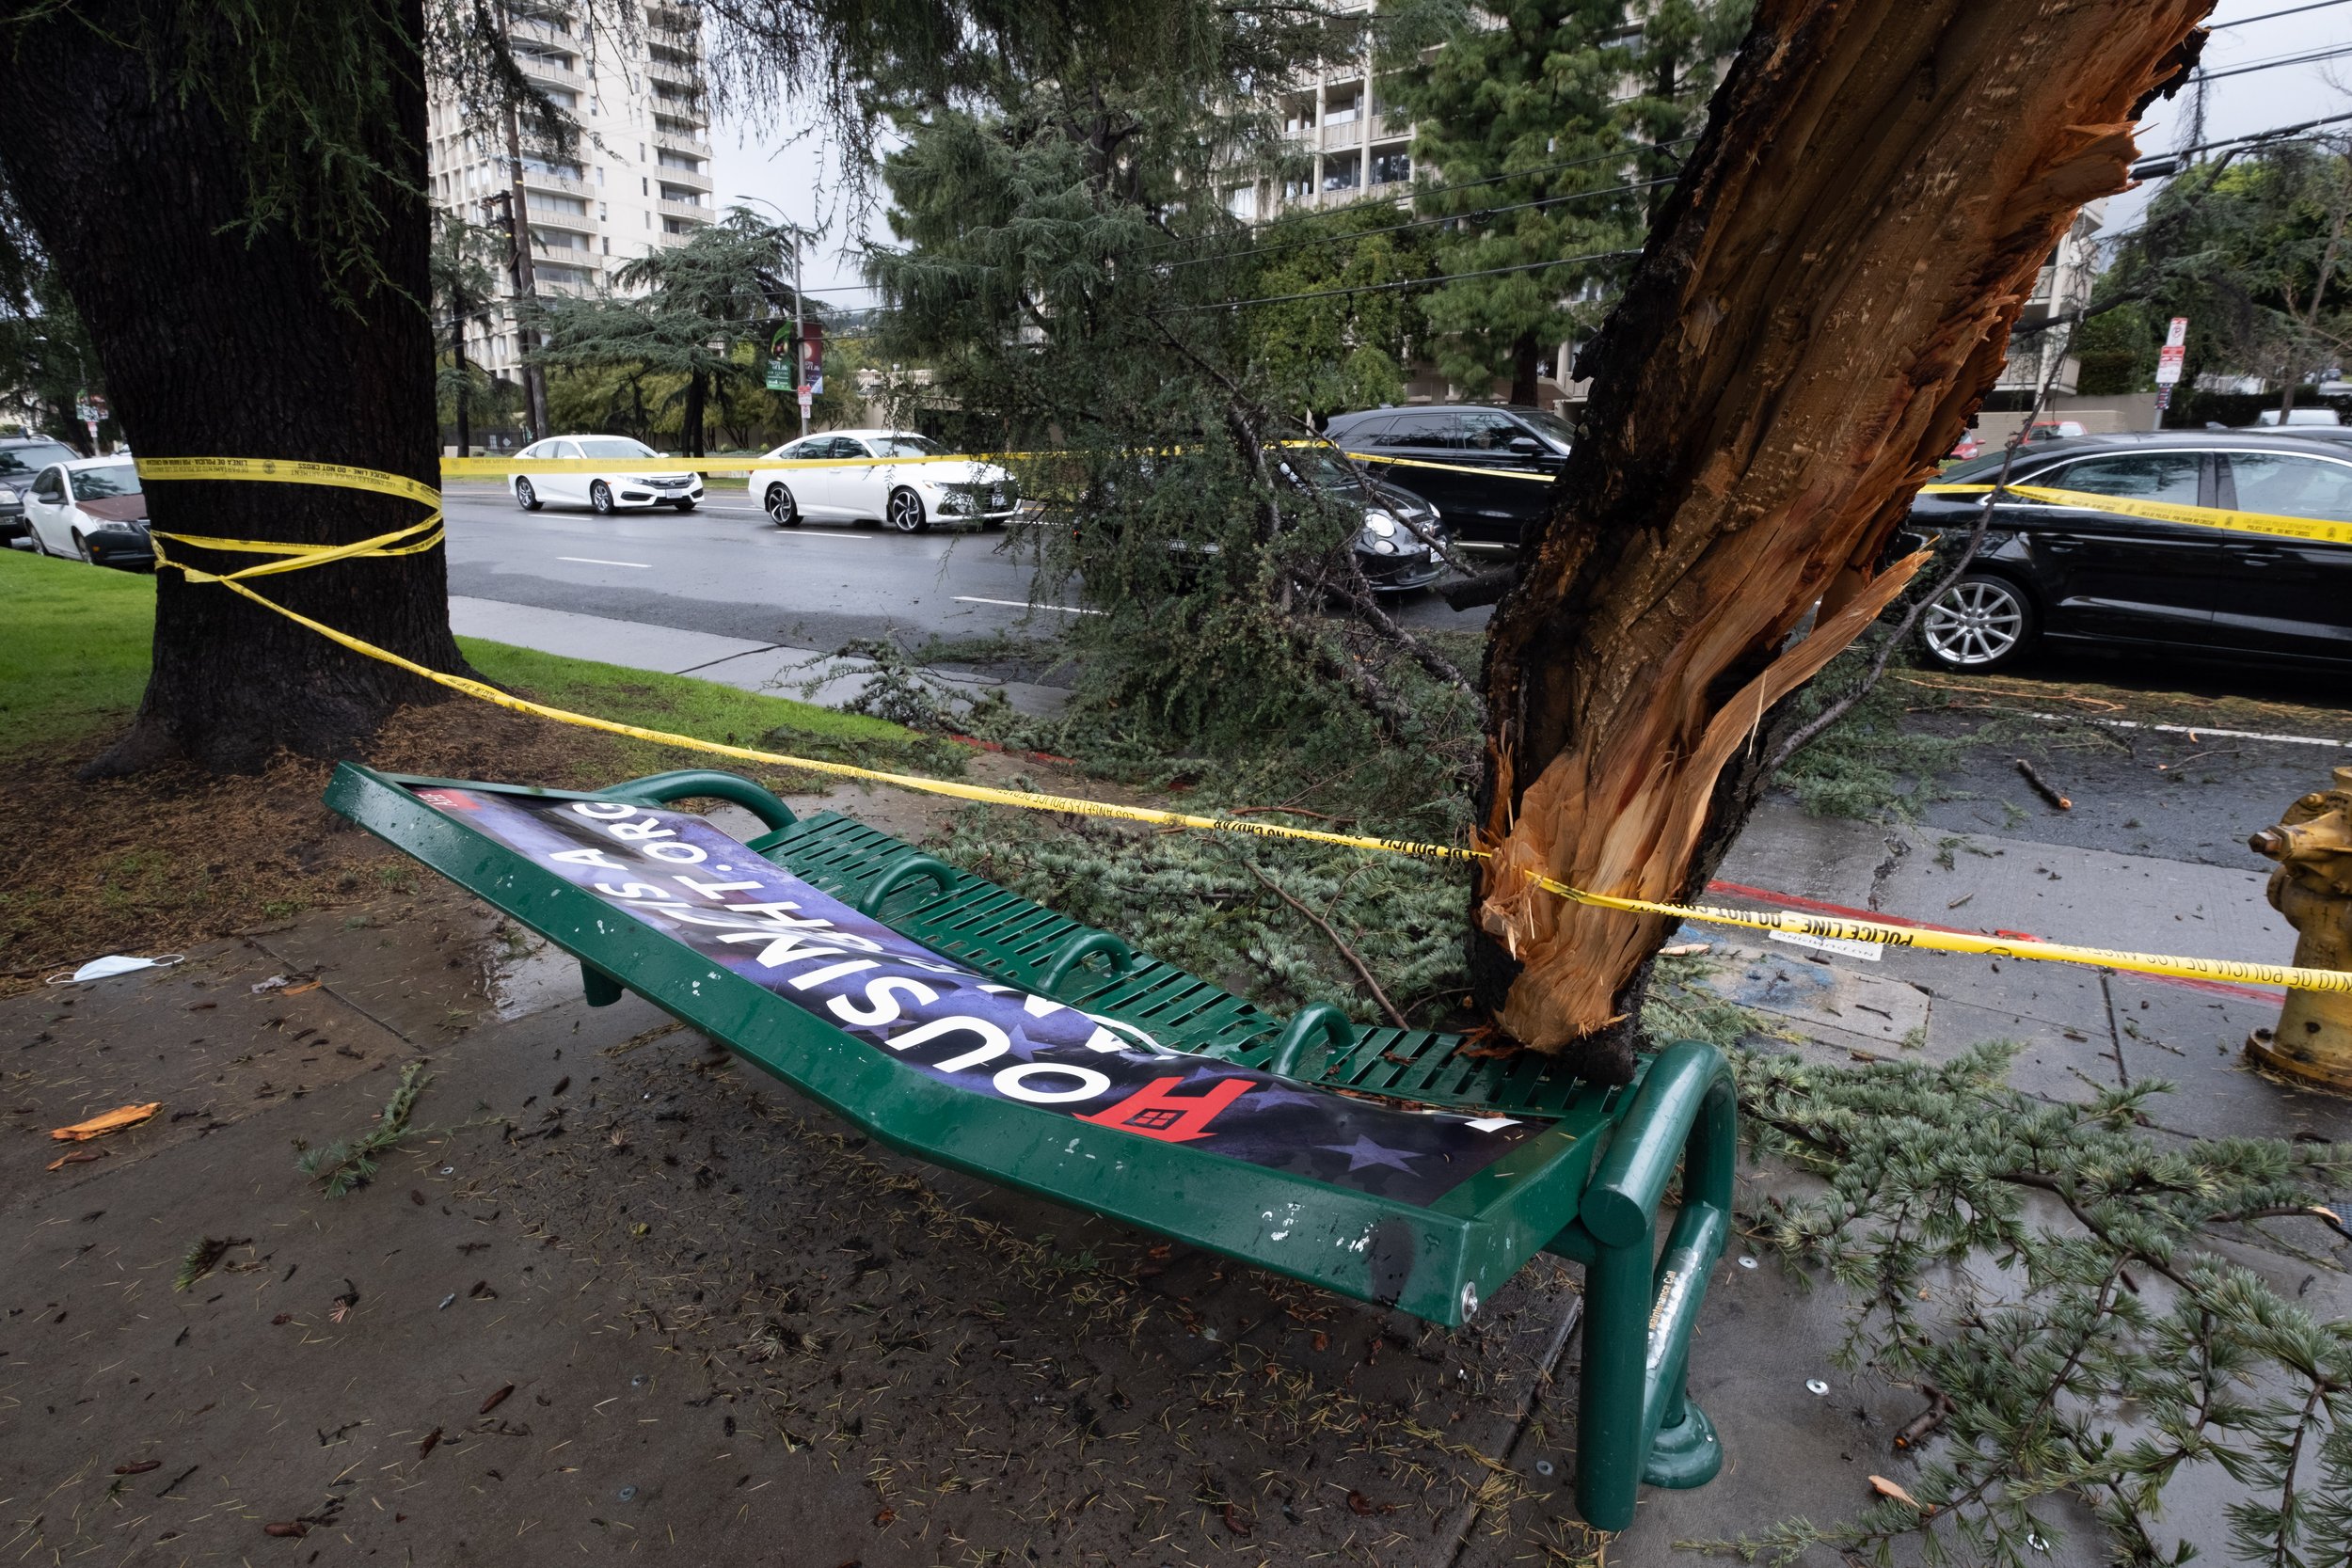  Historic winter storms hit Southern California this week. Between Friday, February 24 and Saturday, February 25, 2023, a large tree branch fell, crushing the bus stop bench beneath it on Los Feliz Boulevard at Commonwealth Avenue in Los Feliz, Calif